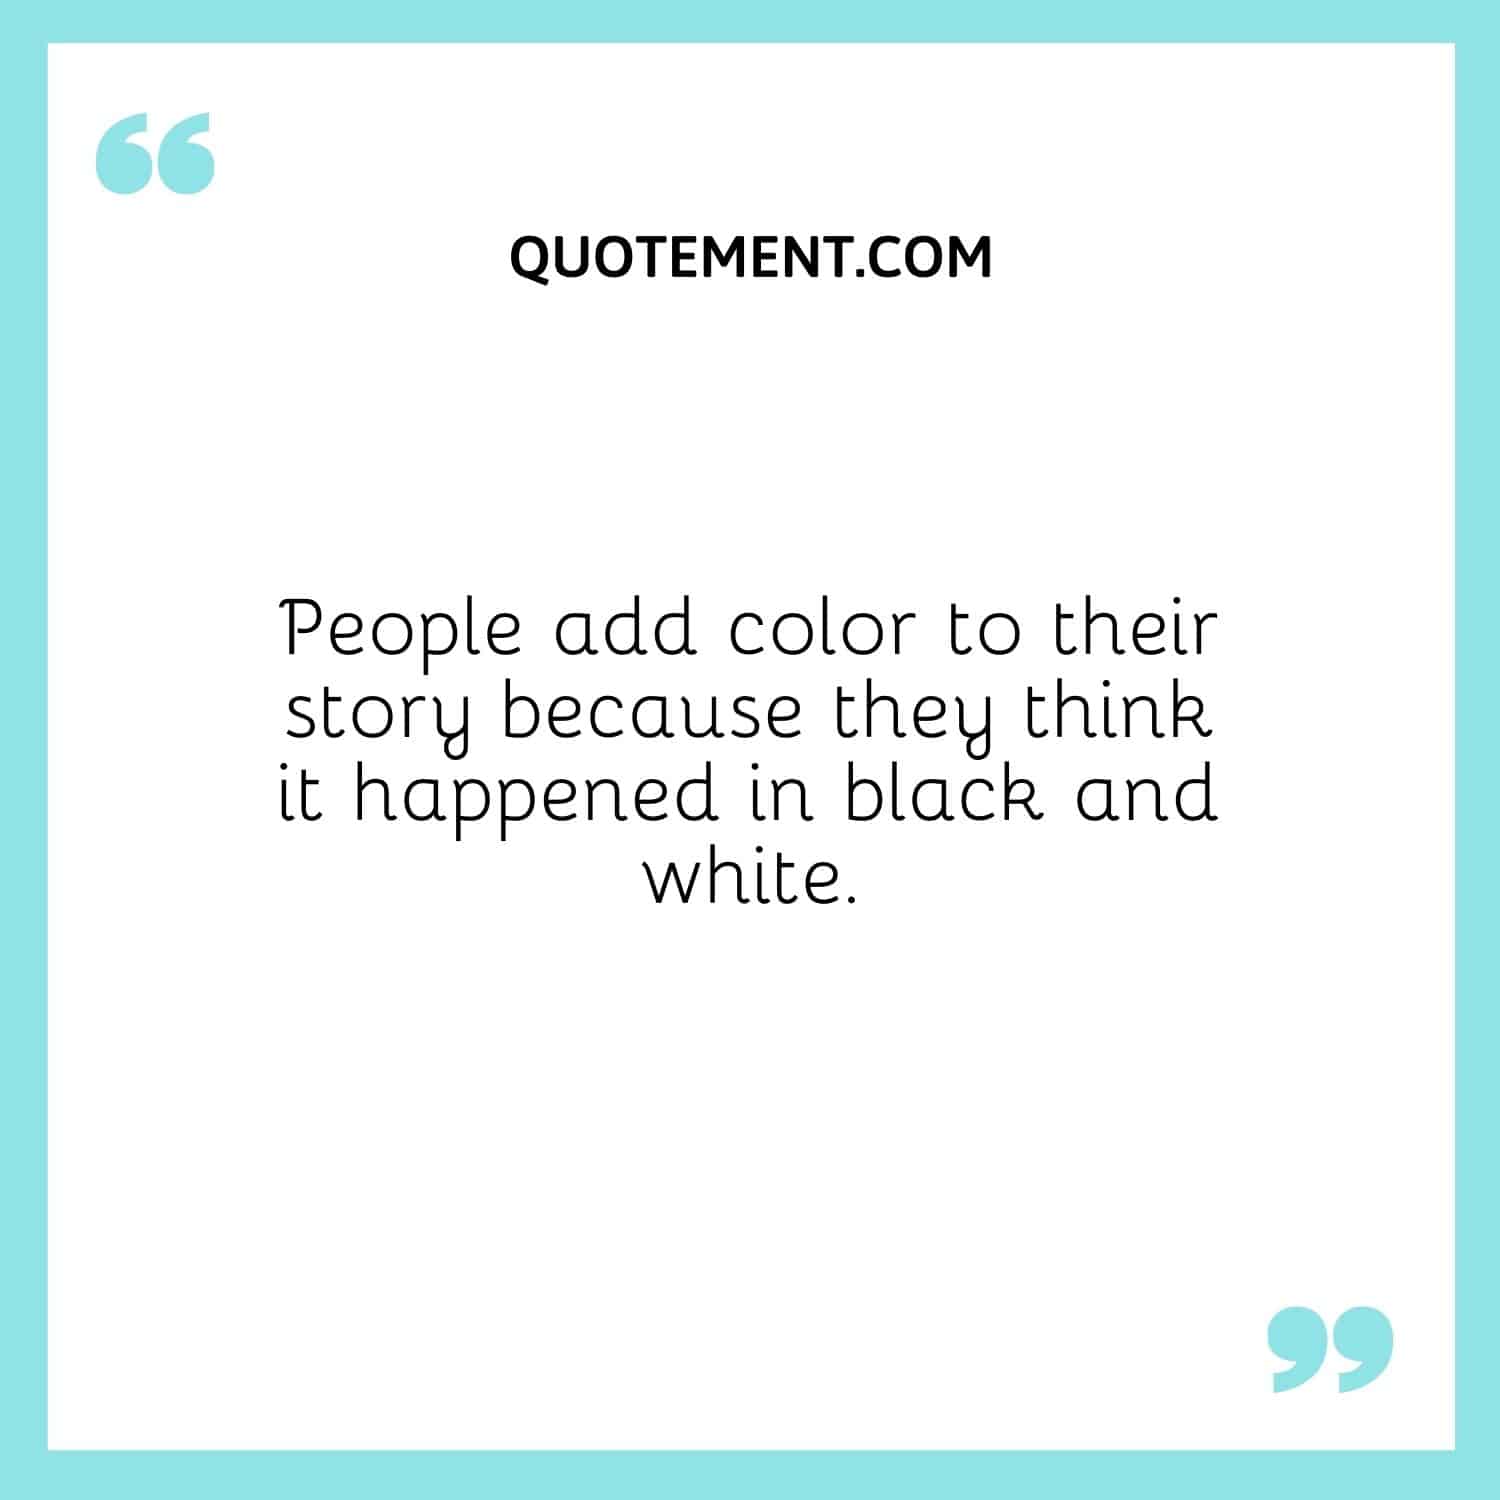 People add color to their story because they think it happened in black and white